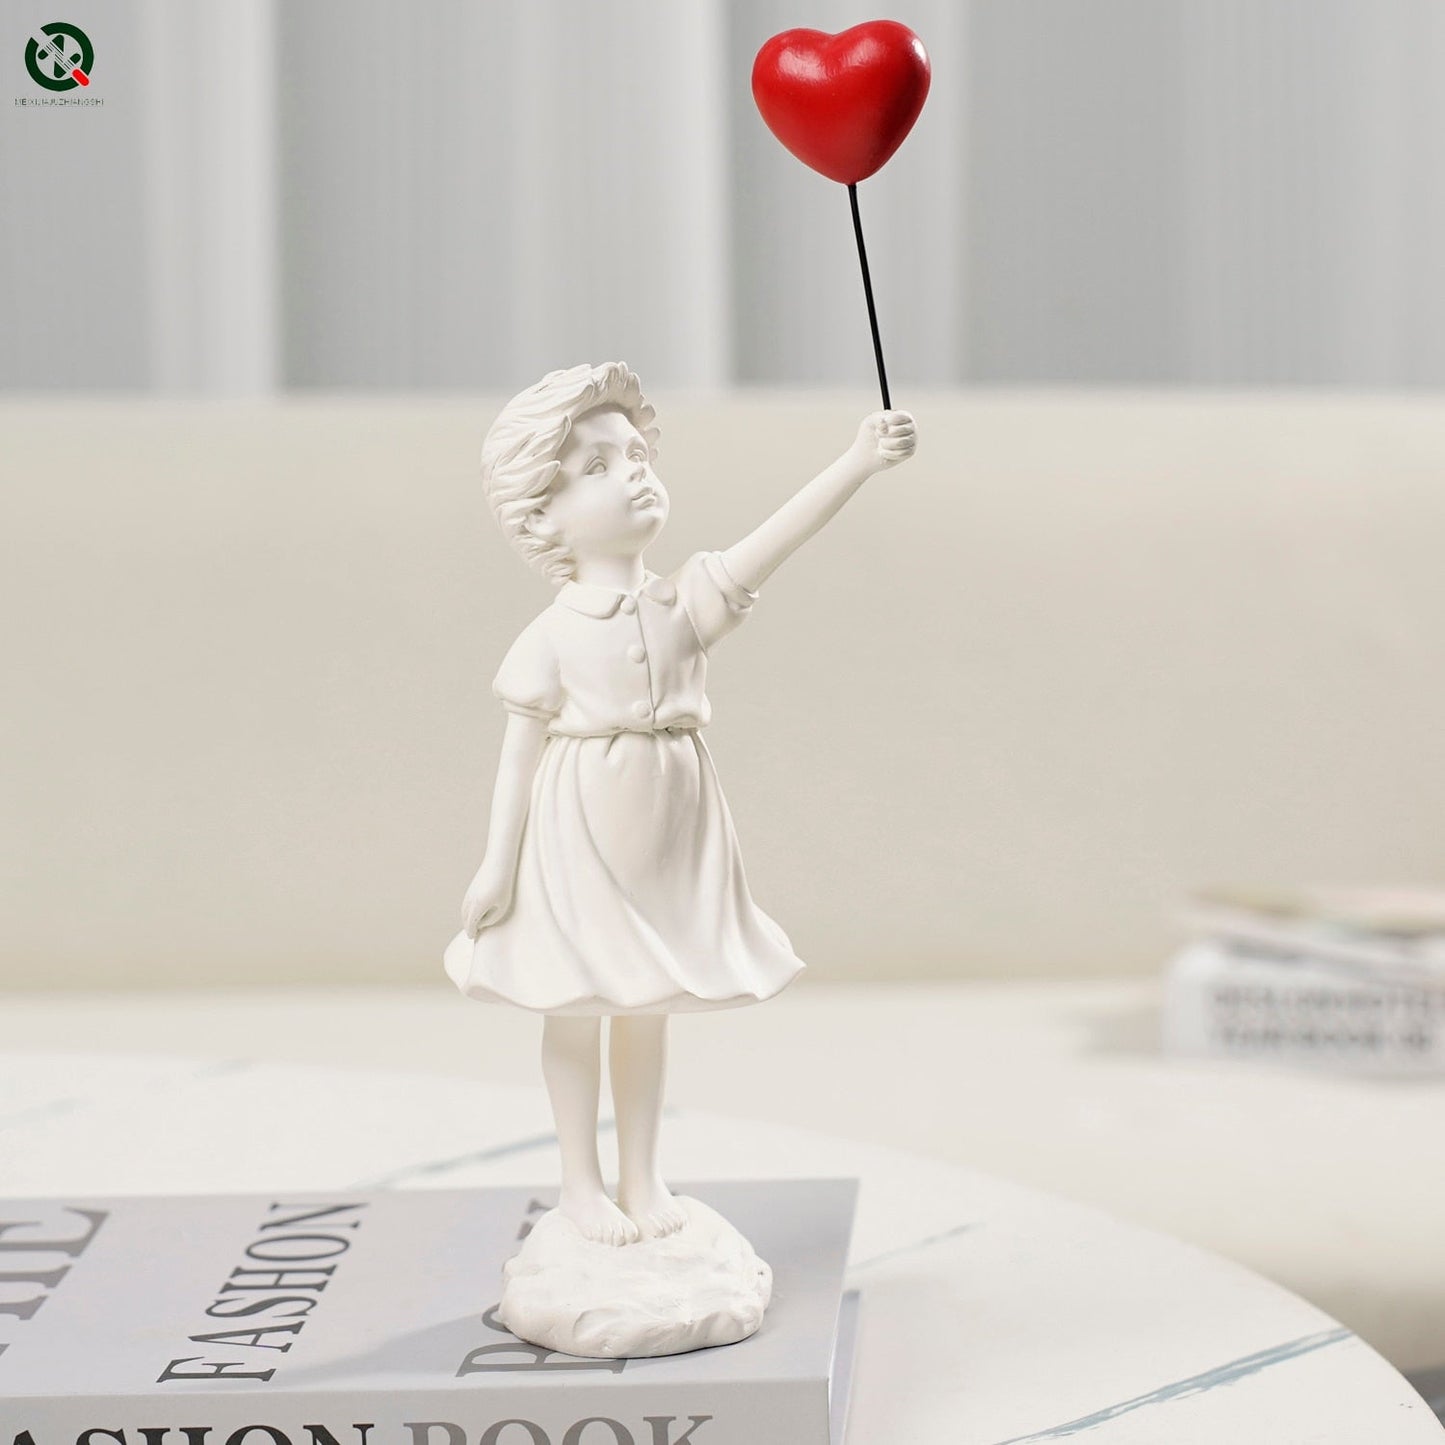 Flying Balloon Girl Figurine, Banksy Home Decor Modern Art Sculpture, Harts Figure Craft Ornament, Collectible Staty